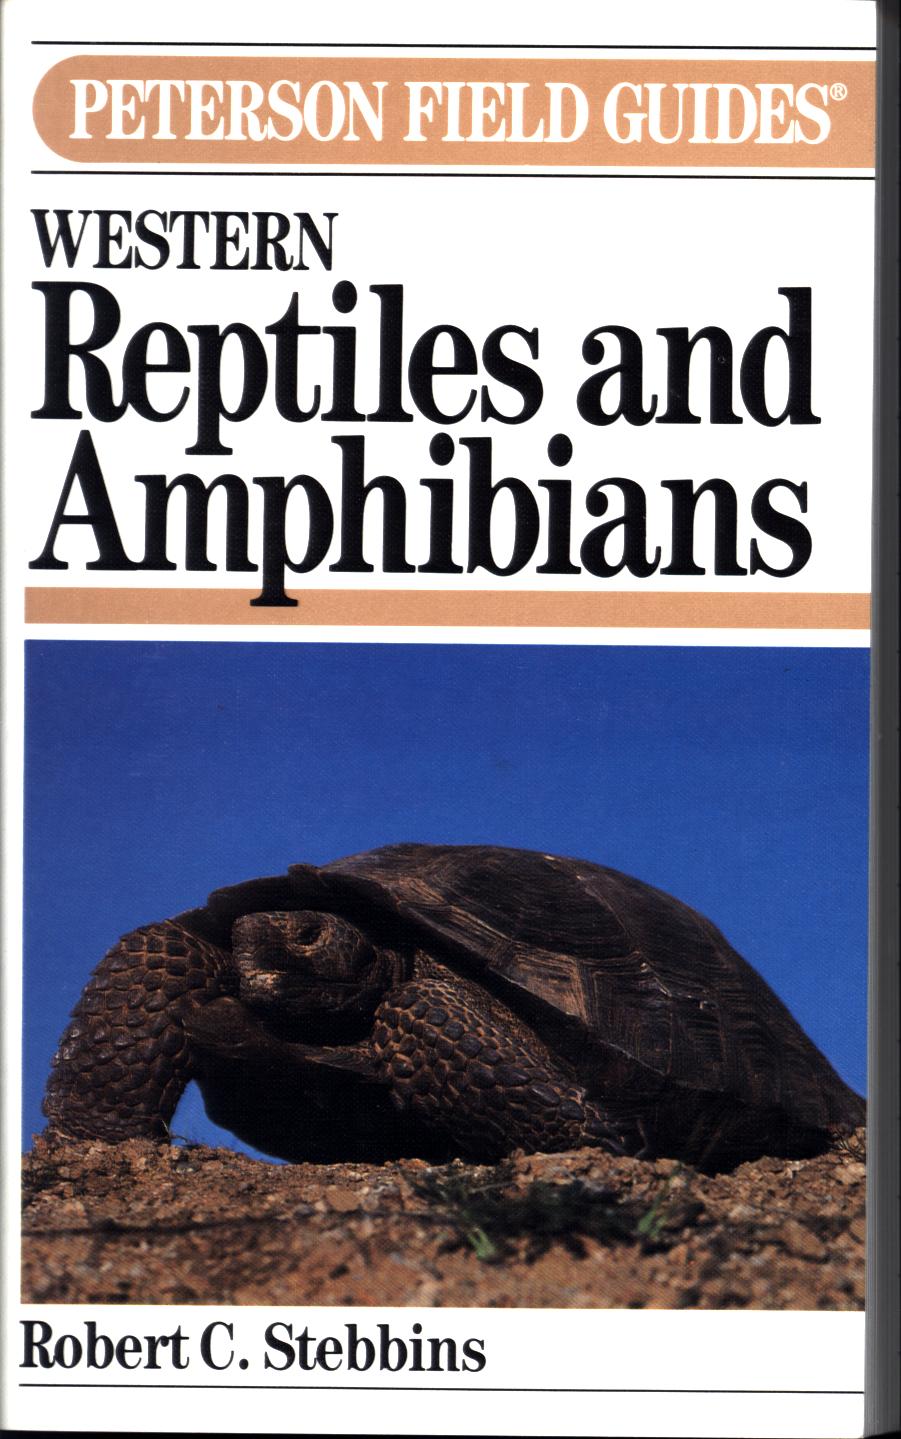 A FIELD GUIDE TO WESTERN REPTILES AND AMPHIBIANS. by Robert C. Stebbins.